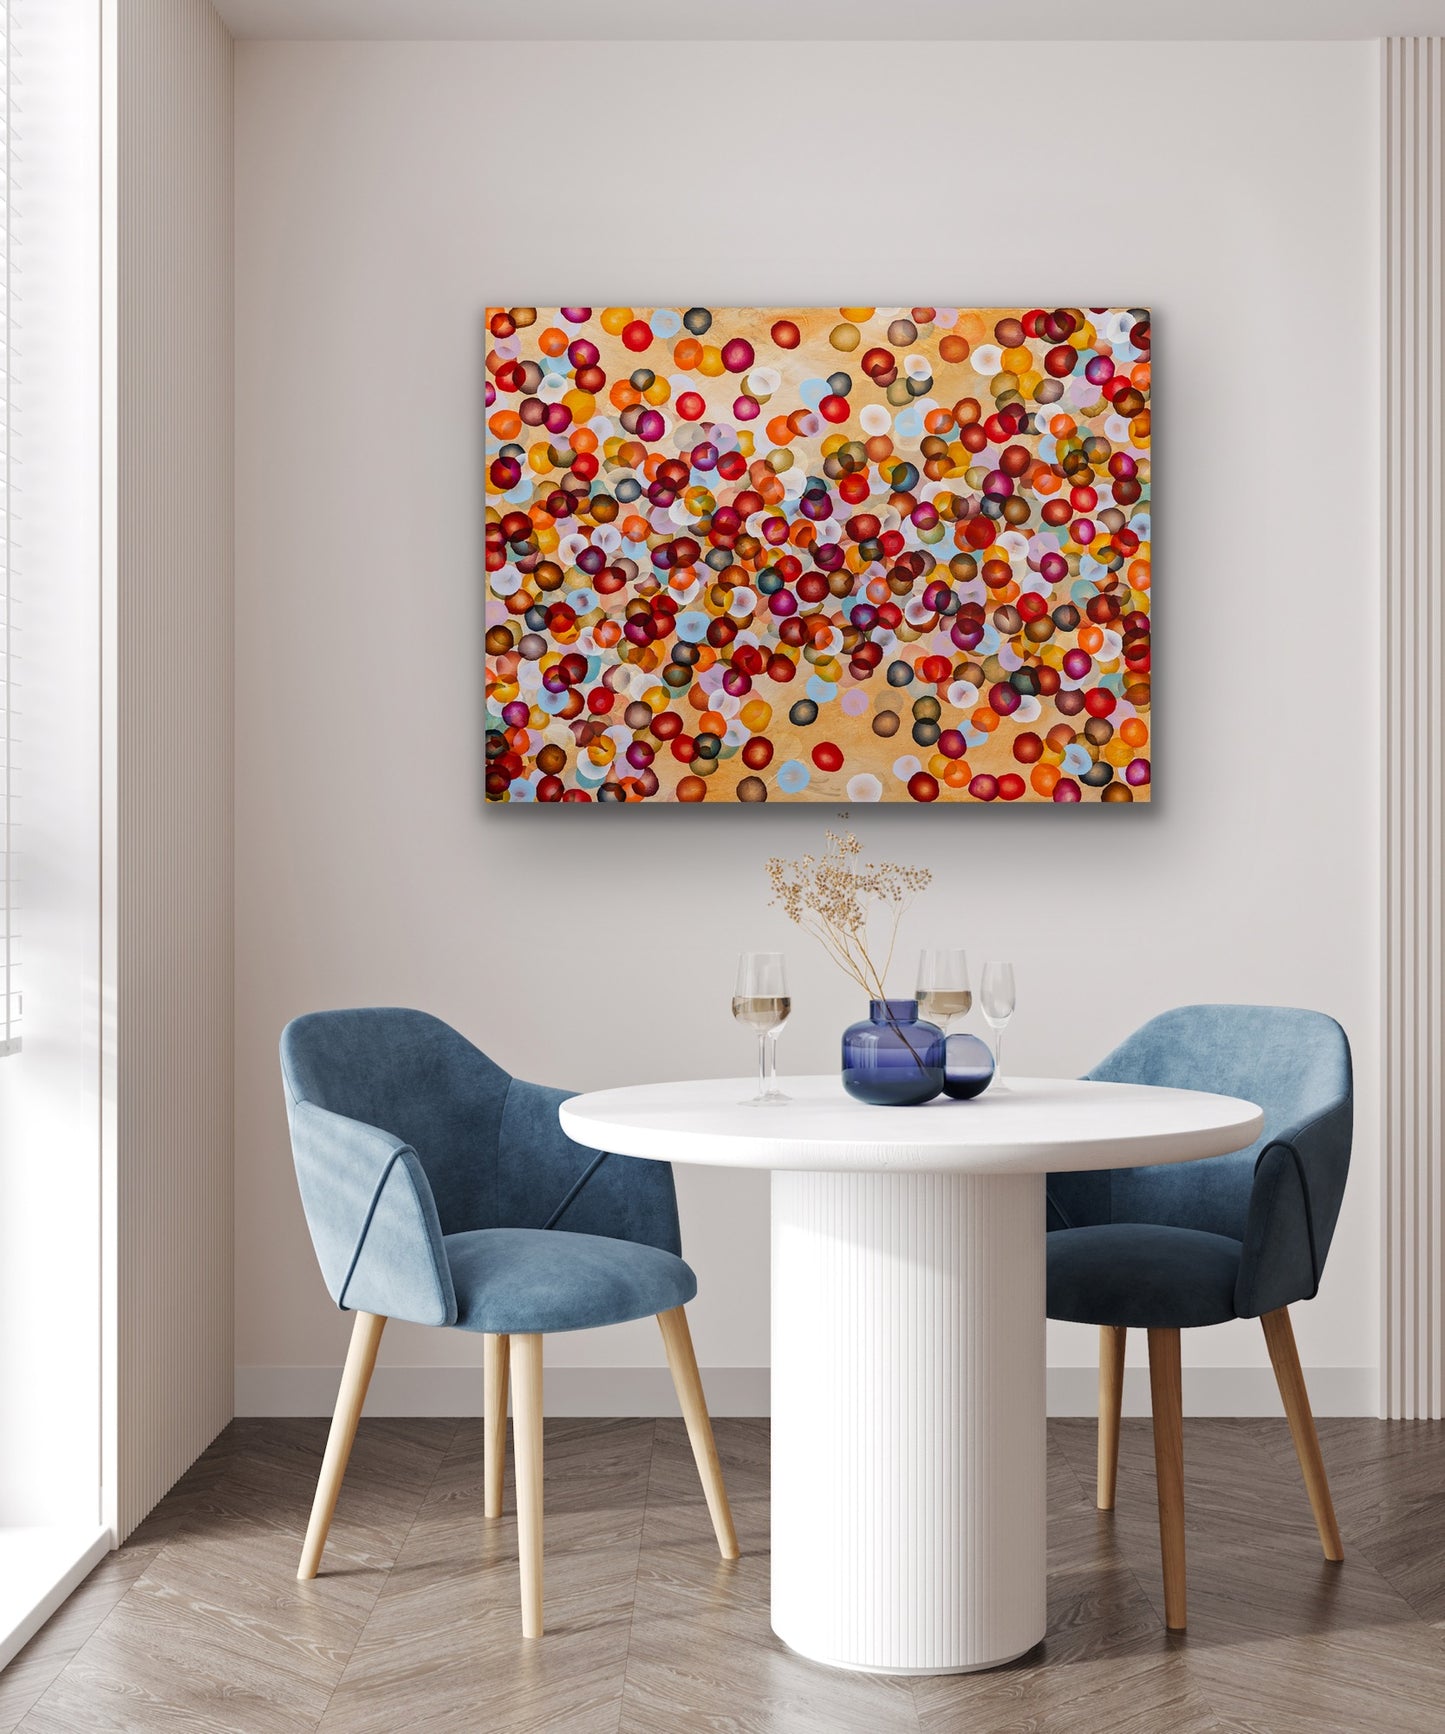 Bio Bloom Reef Flurry I – Large Original Abstract Painting Sealife Spring Colours